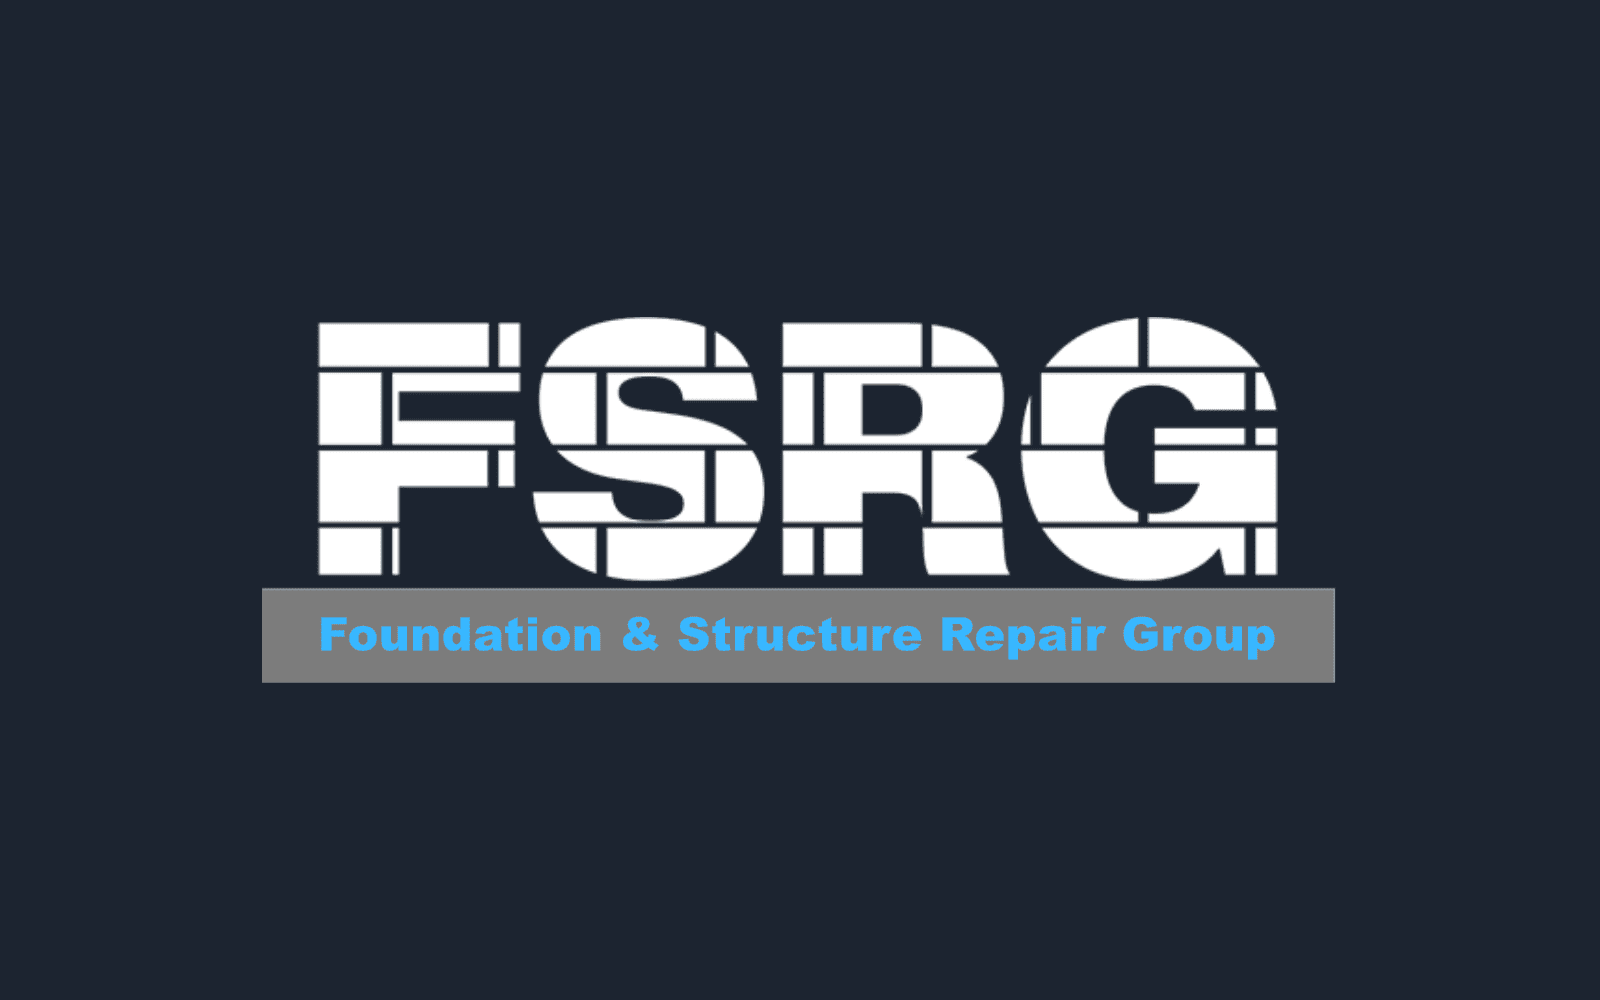 Foundation and Structure Repair Group